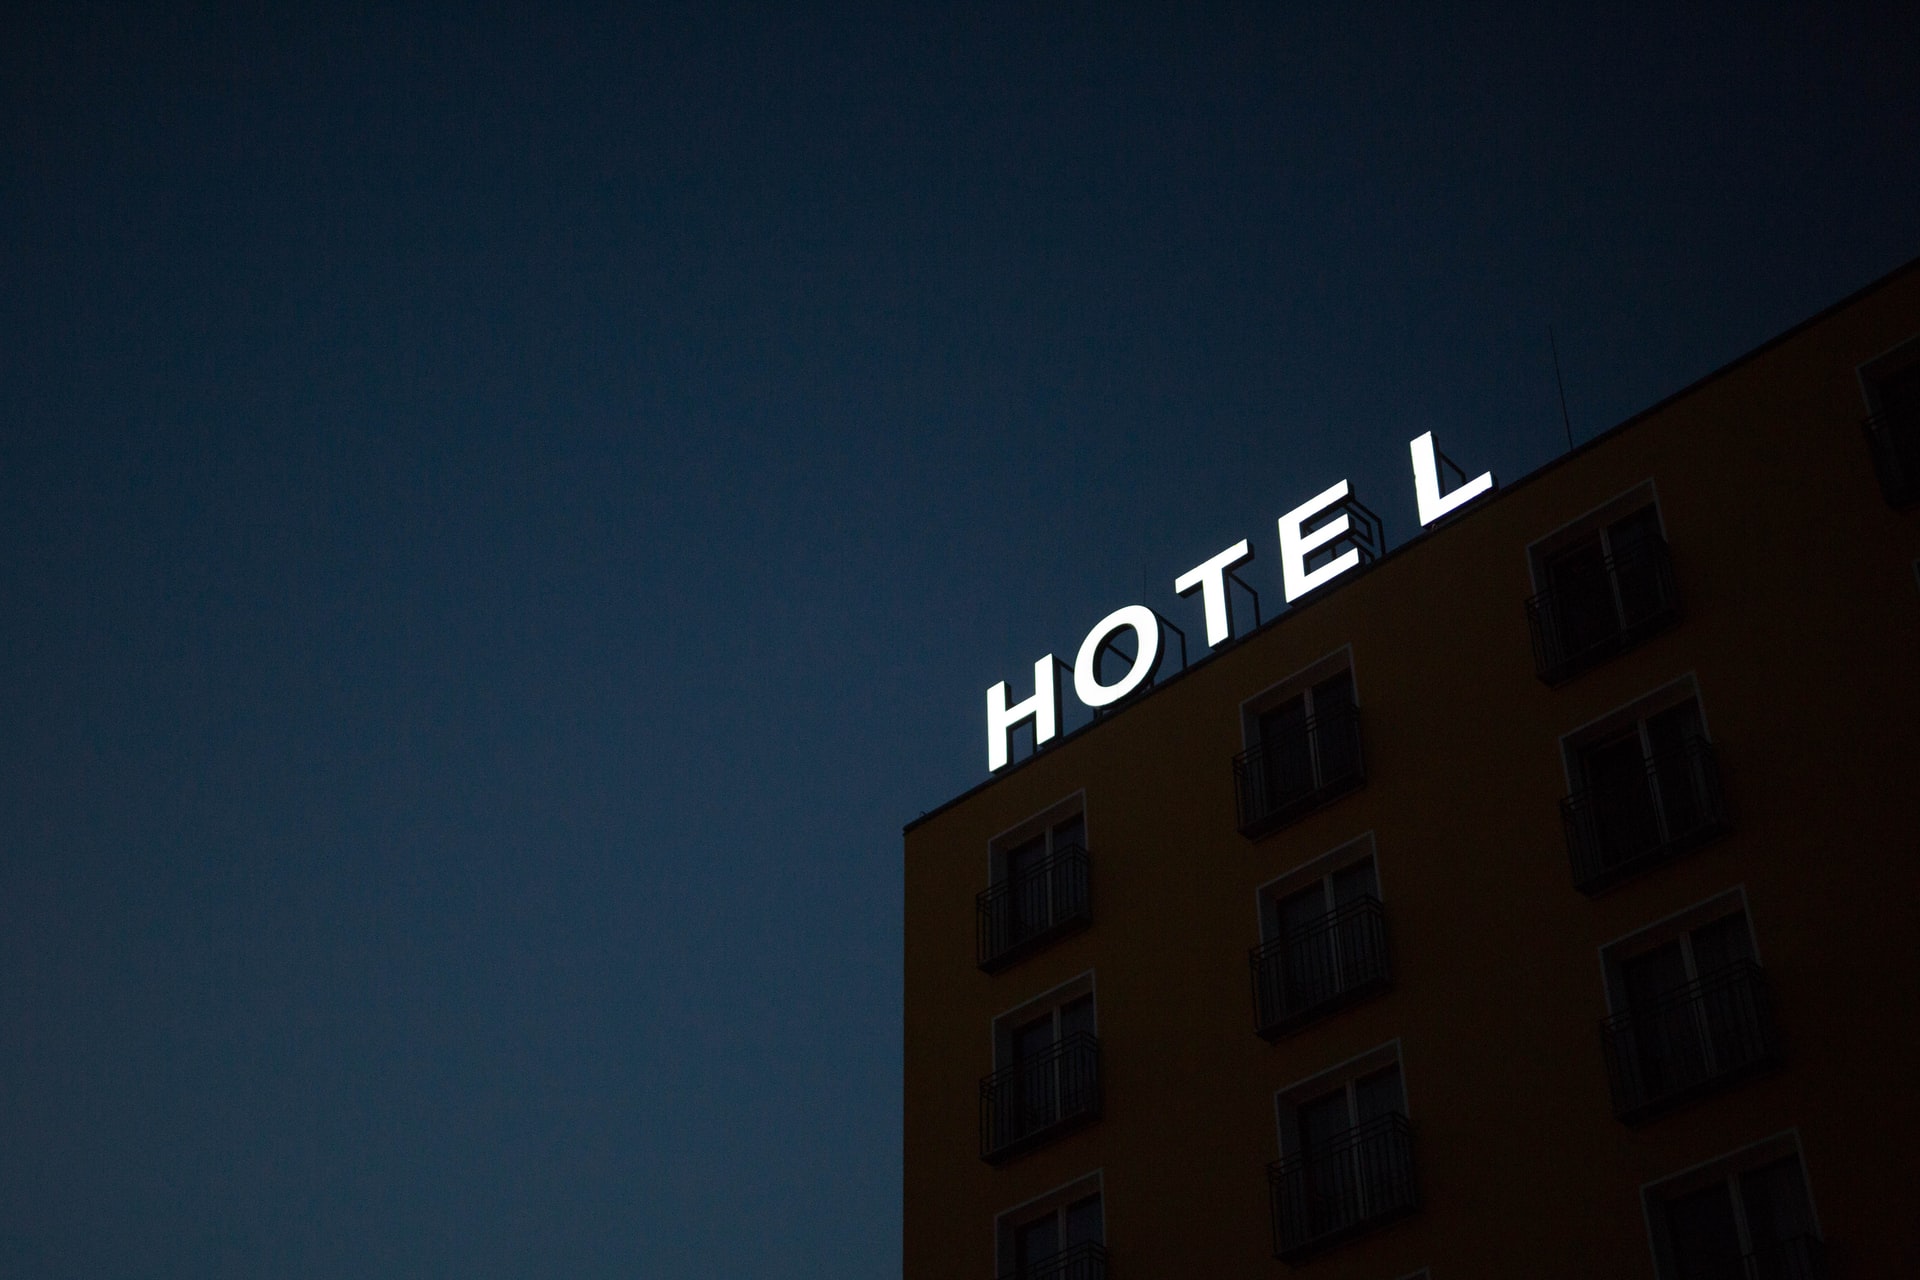 Hotel Market is Among the Nation’s Most Depressed